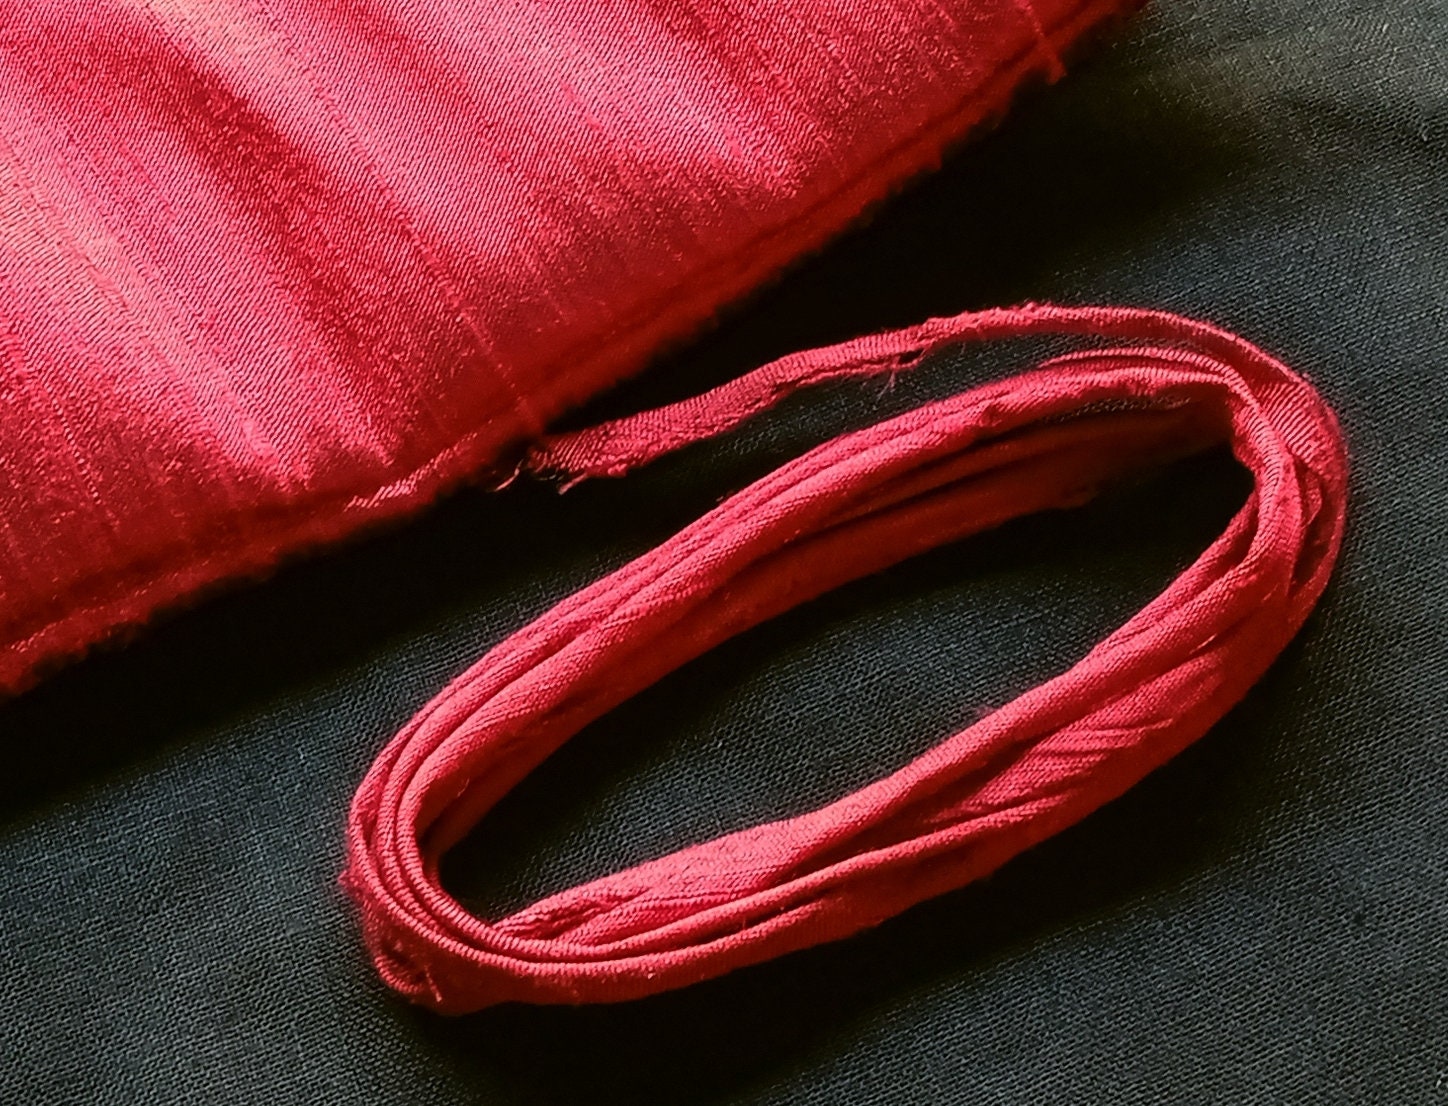 Red SILK Cord, Wrapped Silk Satin Cord Rope 1.5 Mm Thick, Organic Natural  Hand Spun Silk, Polyester Core, for Jewelry 3 Feet 